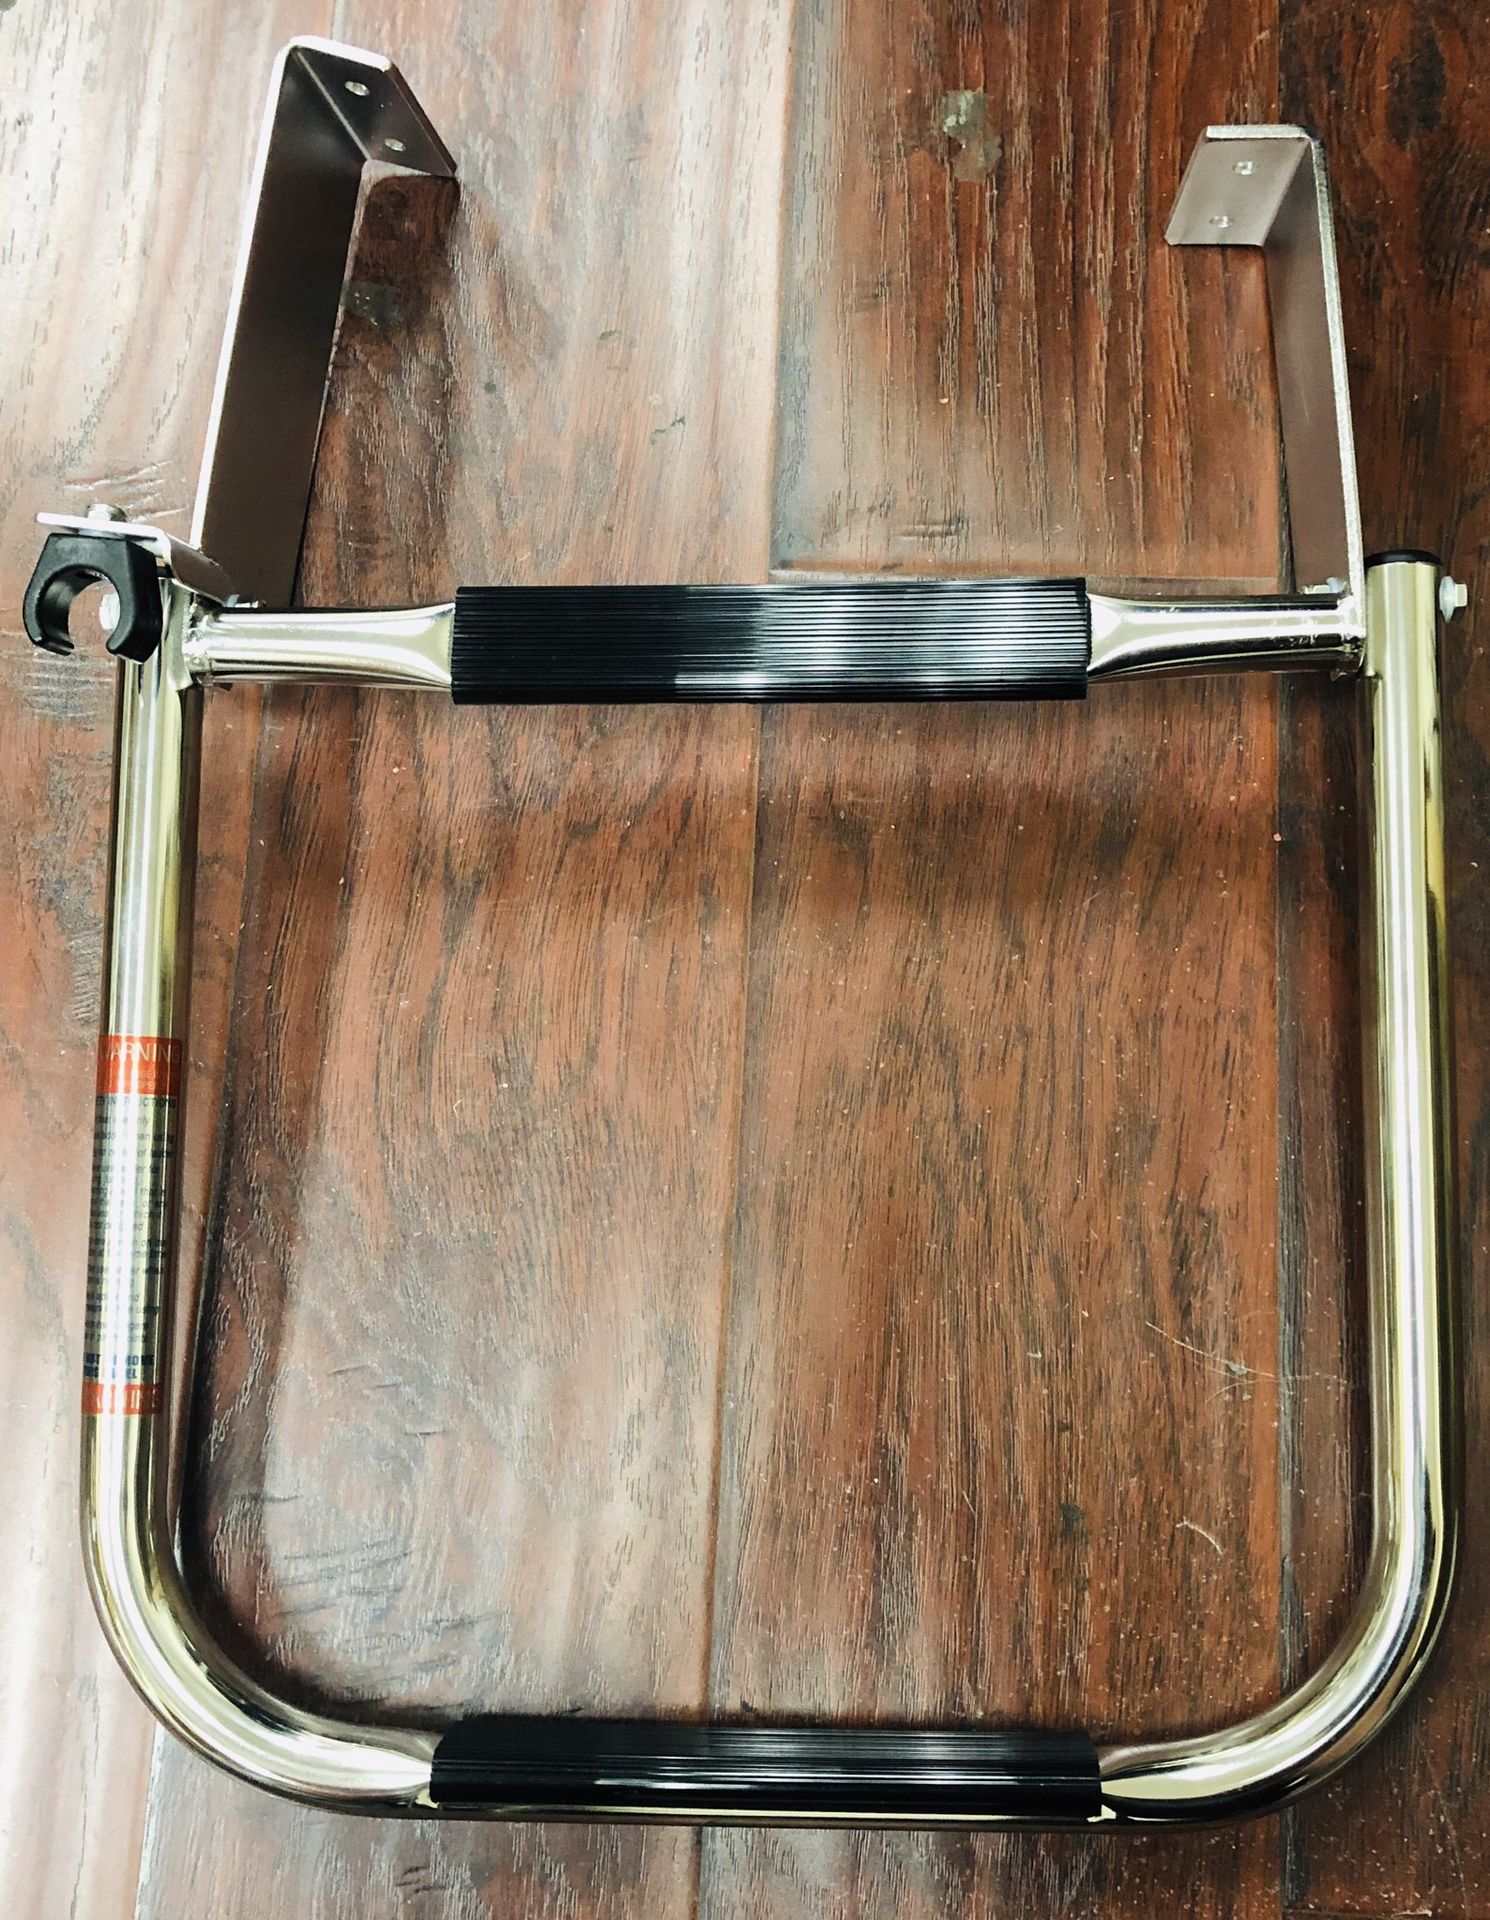 Amarine-made Polished Stainless Steel Marine Boat 1-Step Transom Mount Ladder Hinge Ladder Transom Mounted Ladder Stows in Upright Position - New